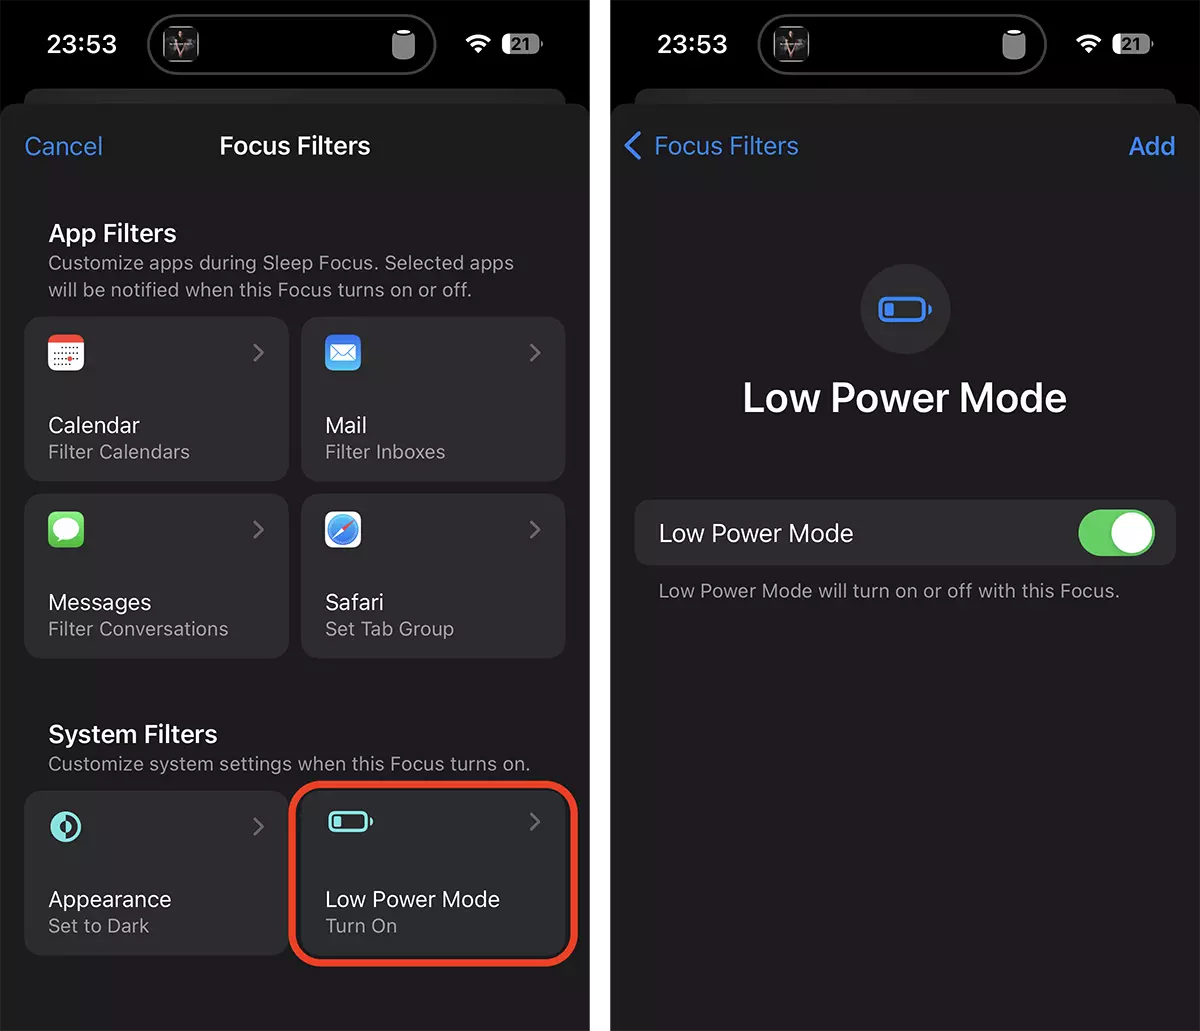 System Filters - Low Power Mode